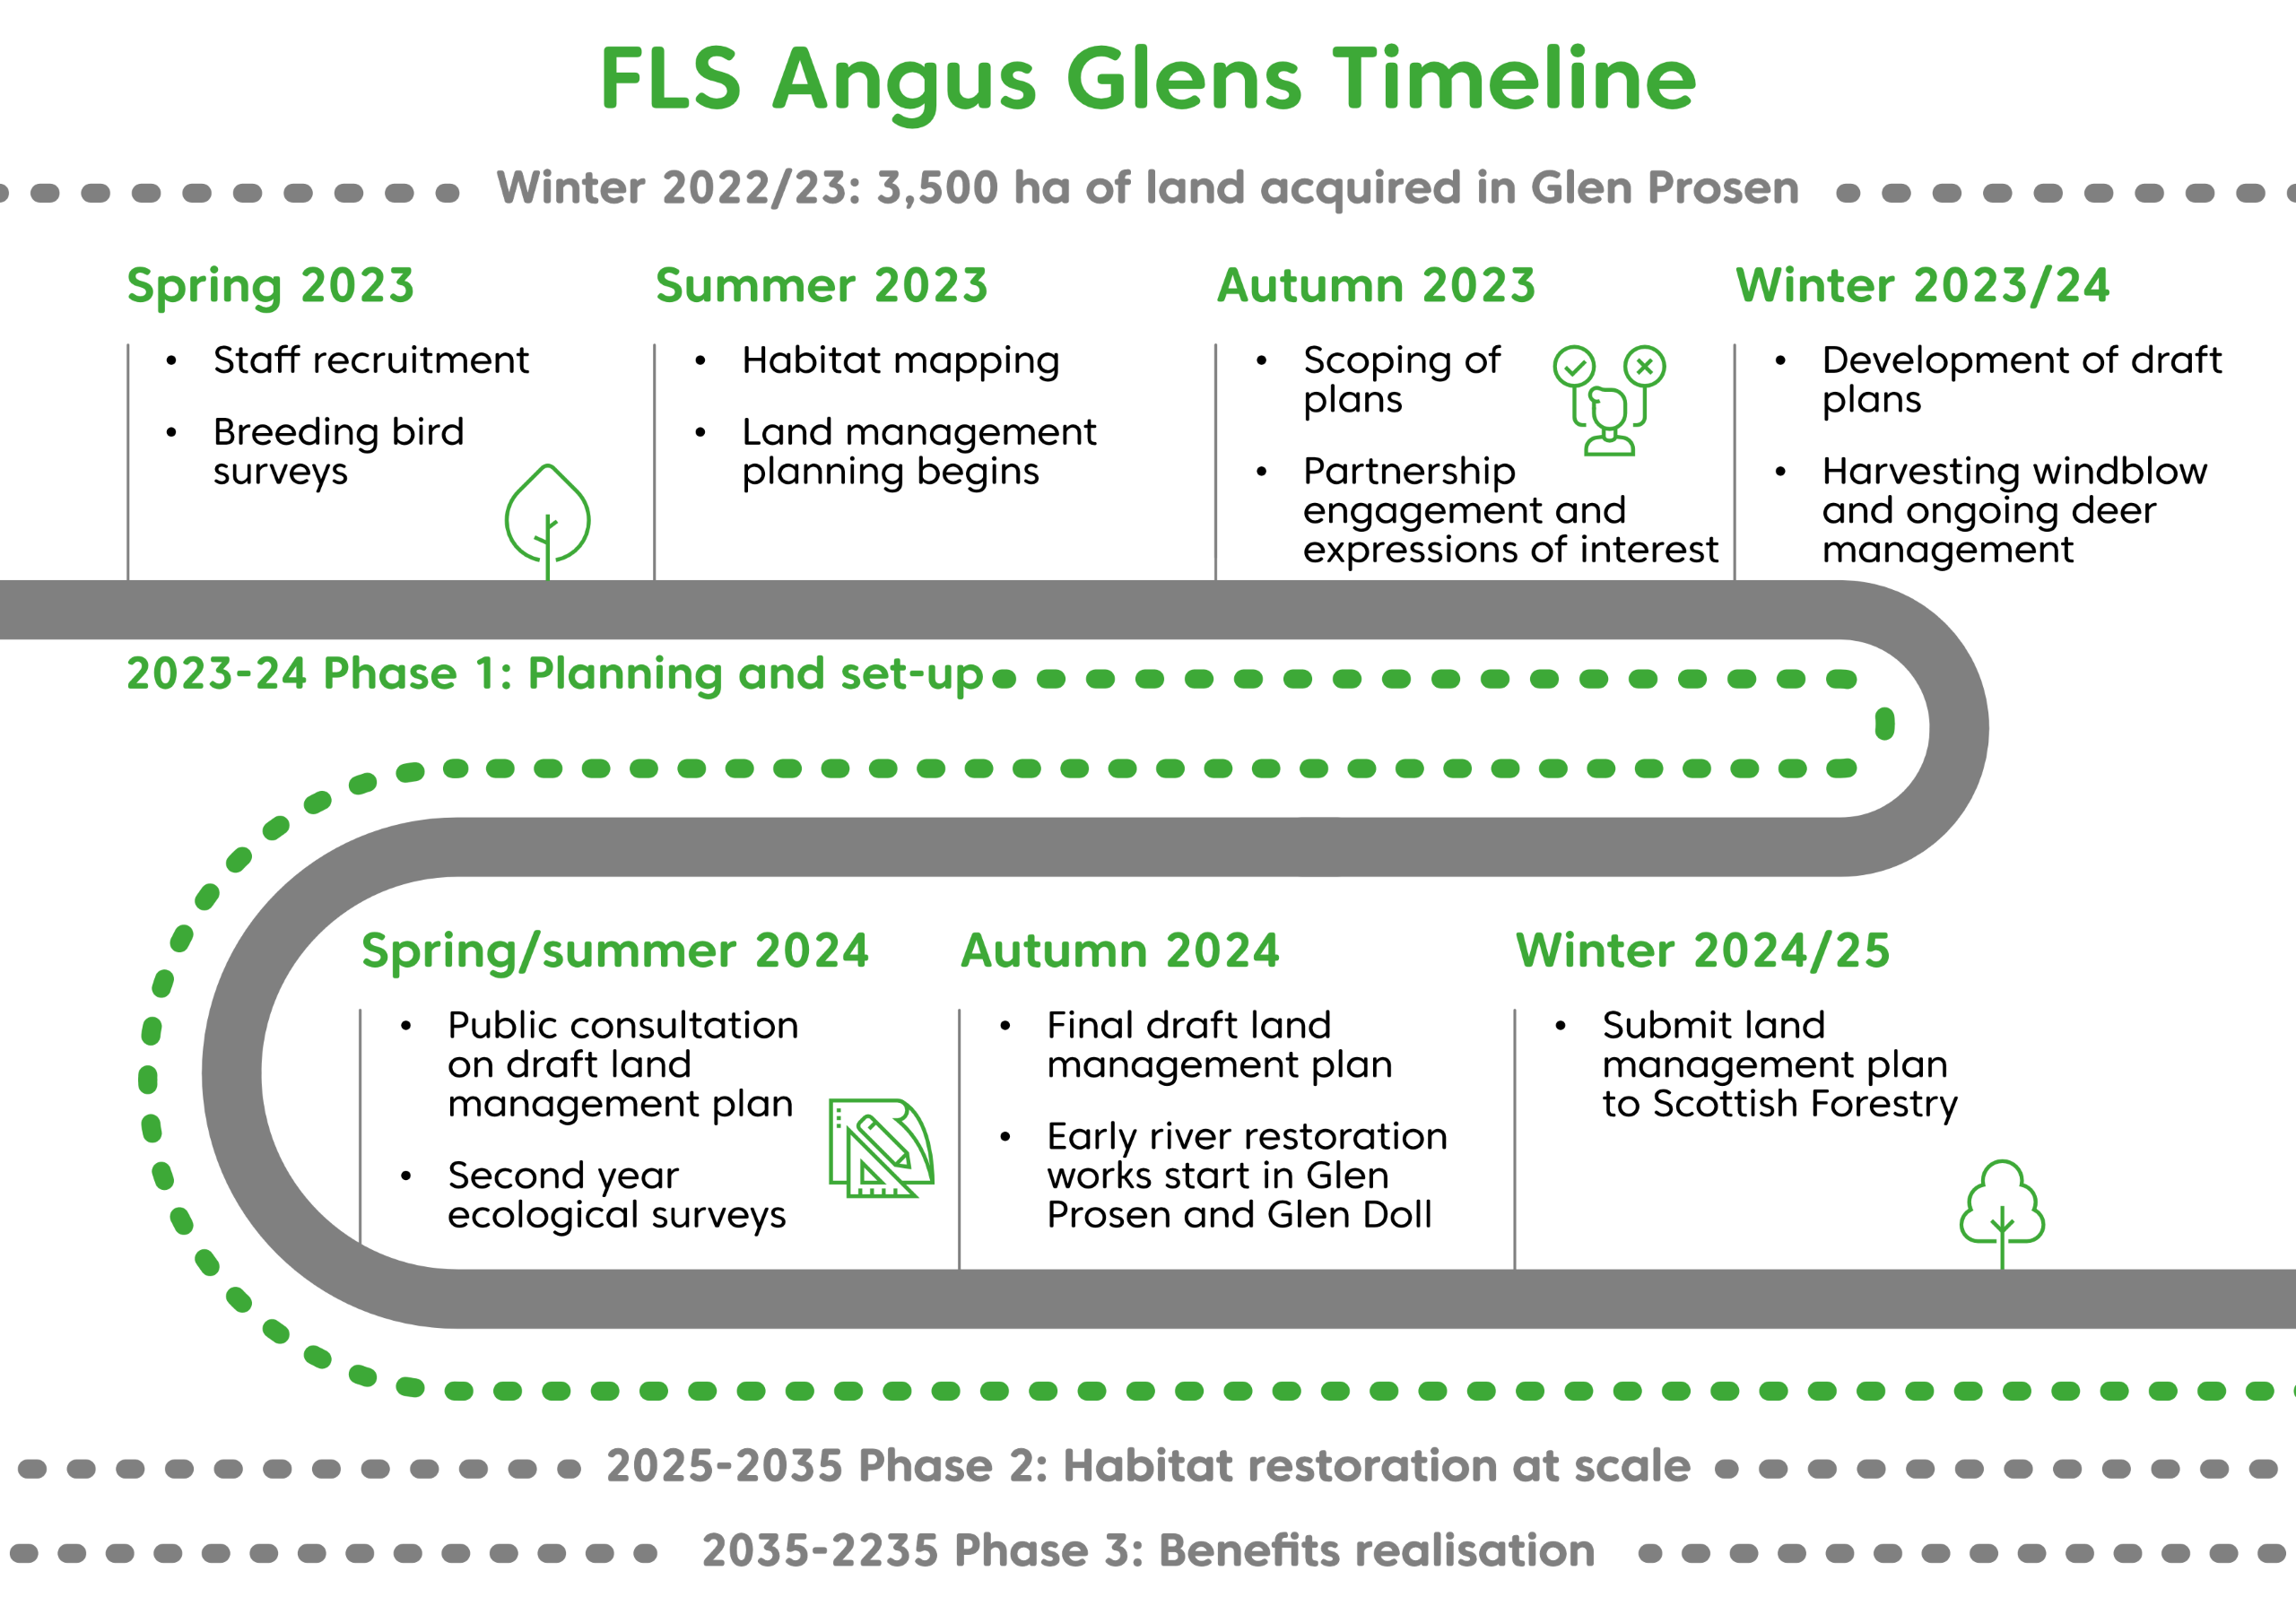 A roadmap showing the FLS Angus Glens timeline. Winter 2022/23: 3,500 hectares of land acquired in Glen Prosen.  Spring 2023: Staff recruitment. Breeding bird surveys. Summer 2023: Habitat mapping. Land management planning begins.  Autumn 2023: Scoping of plans. Partnership engagement and expressions of interest.  Winter 2023/24: Development of draft plans. Harvesting windblow and ongoing deer management. 2023-24 Phase 1: Planning and set-up: Spring/summer 2024 - public consultation on draft land management plan and second year ecological surveys.  Autumn 2024 - Final draft land management plan and early river resotrtion works start in Glen Prosen and Glen Doll.  Winter 2024/25 - Submit land management plan to Scottish Forestry.  2025-2035 Phase 2: Habitat restoration at scale 2035-2235 Phase 3: Benefits realisation